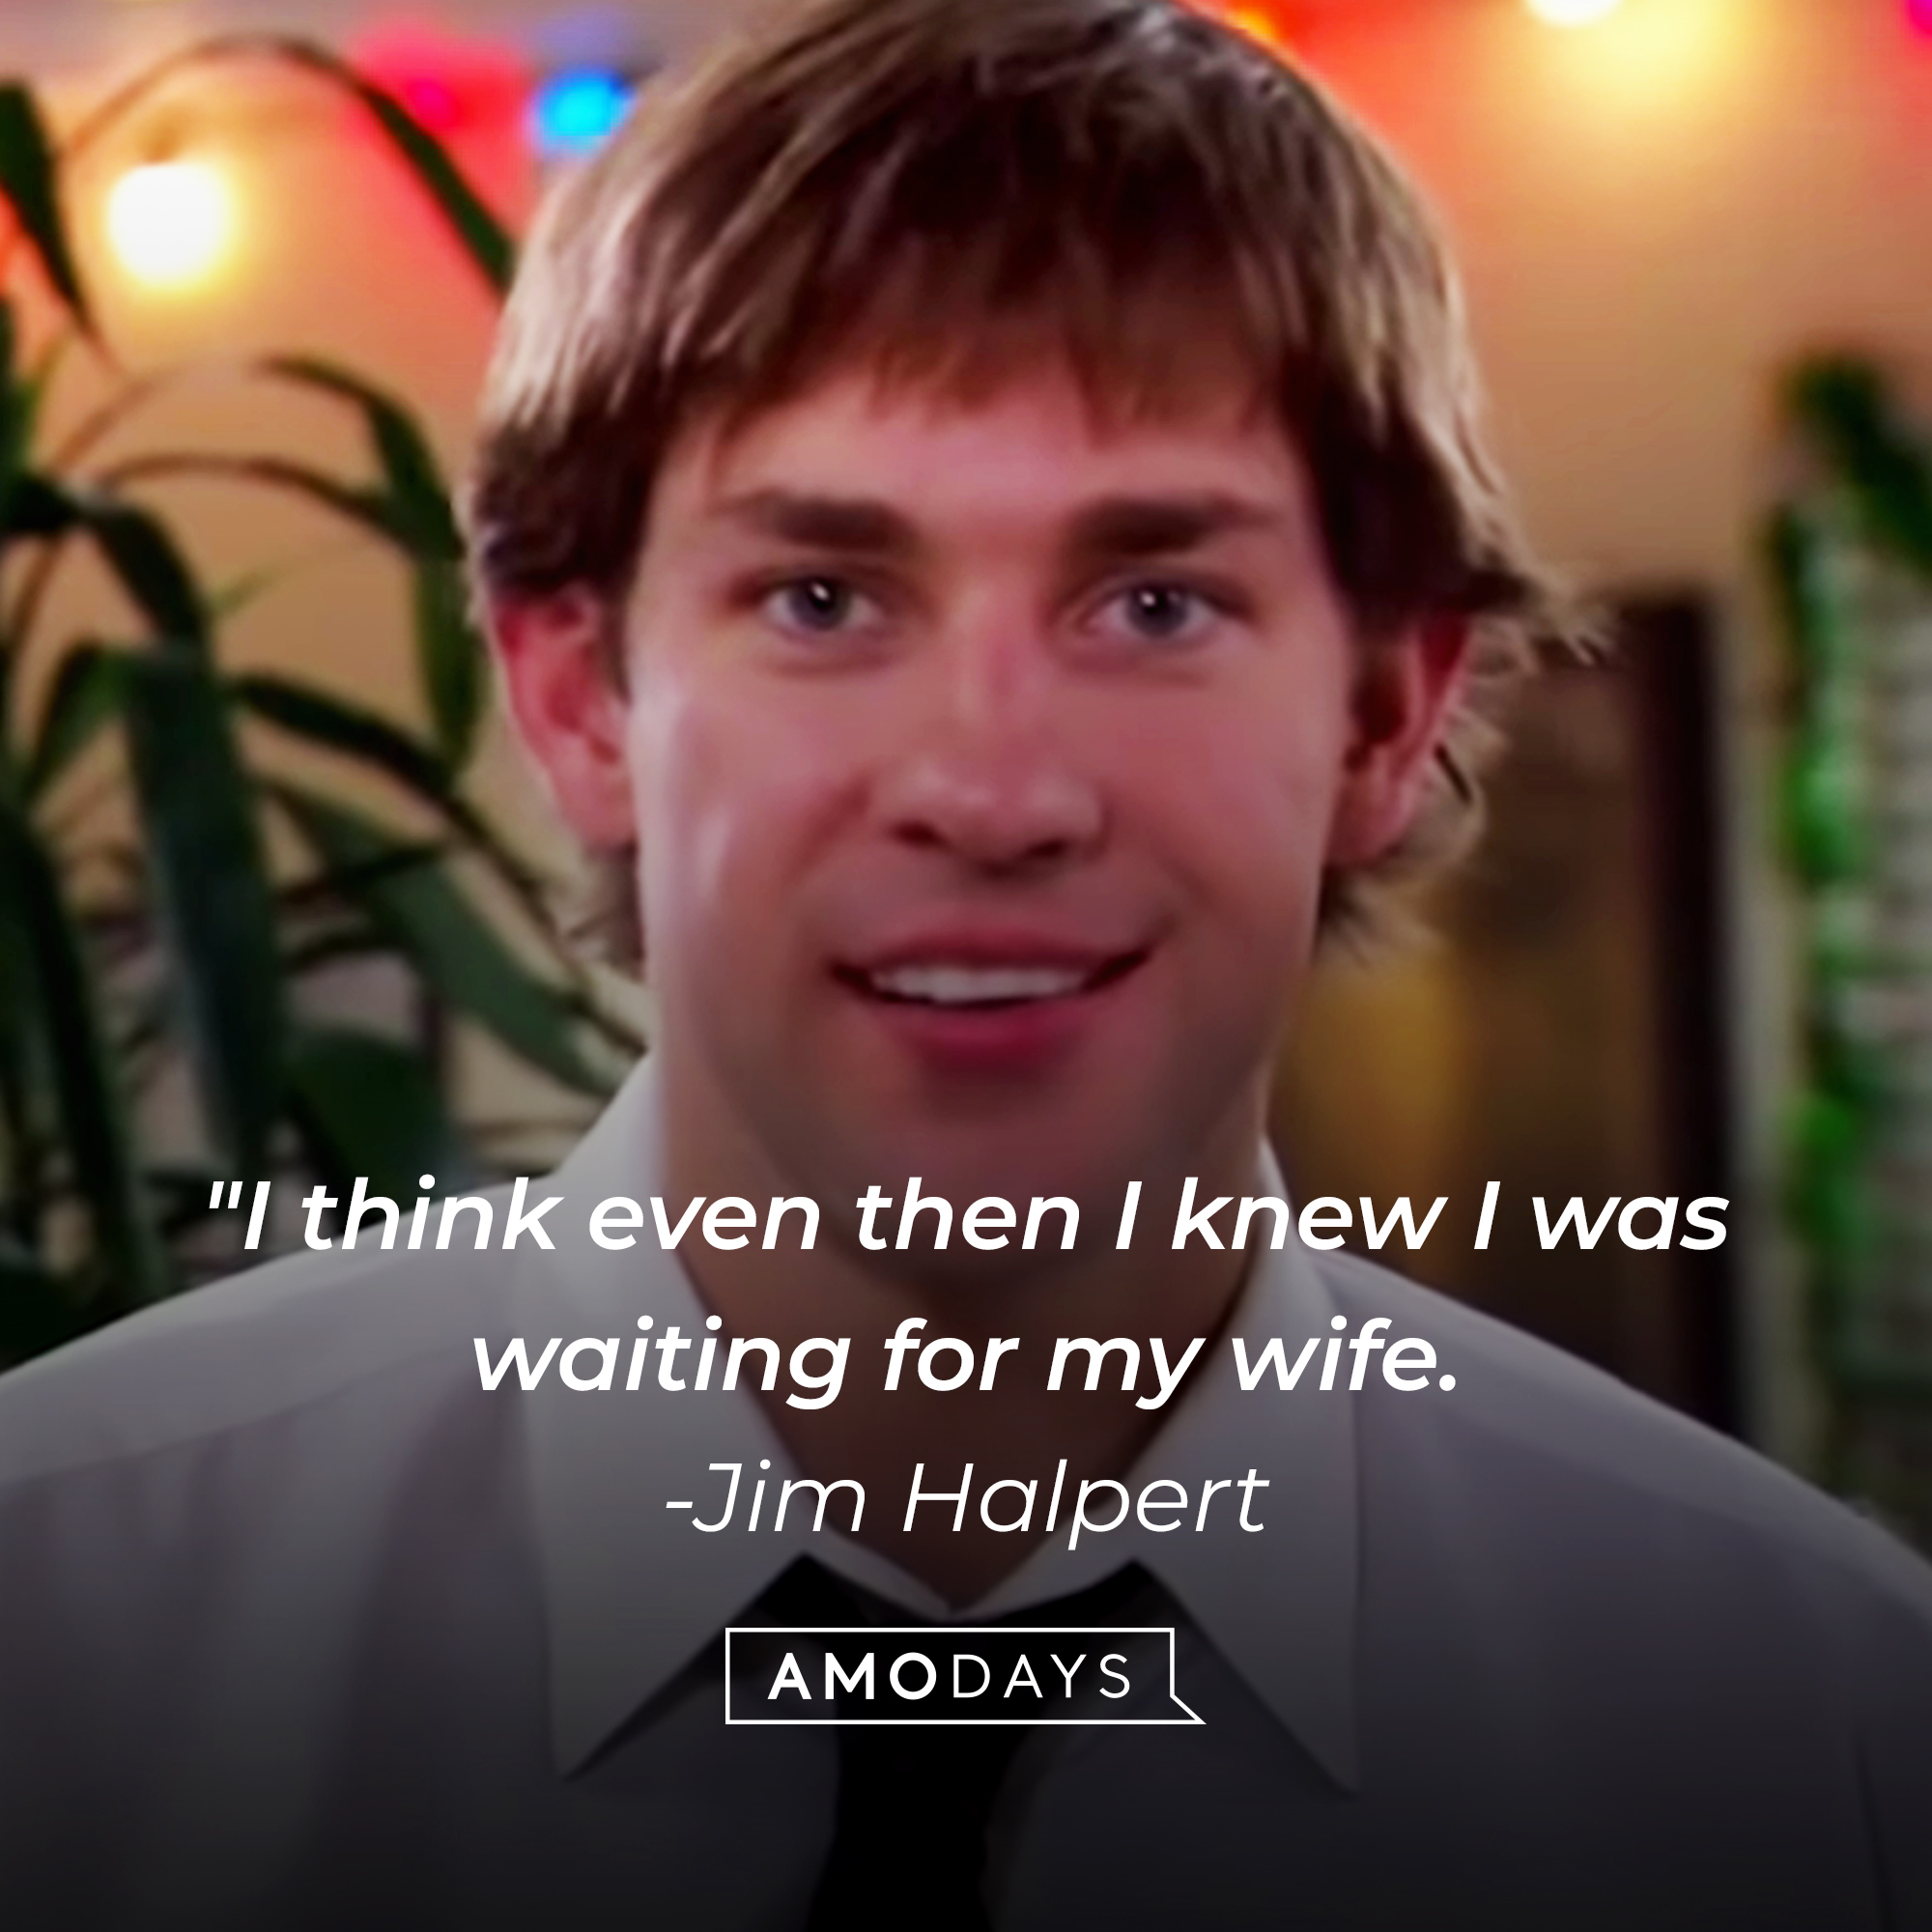 Jim Halpert's quote: "I think even then I knew I was waiting for my wife." | Source: YouTube/TheOffice